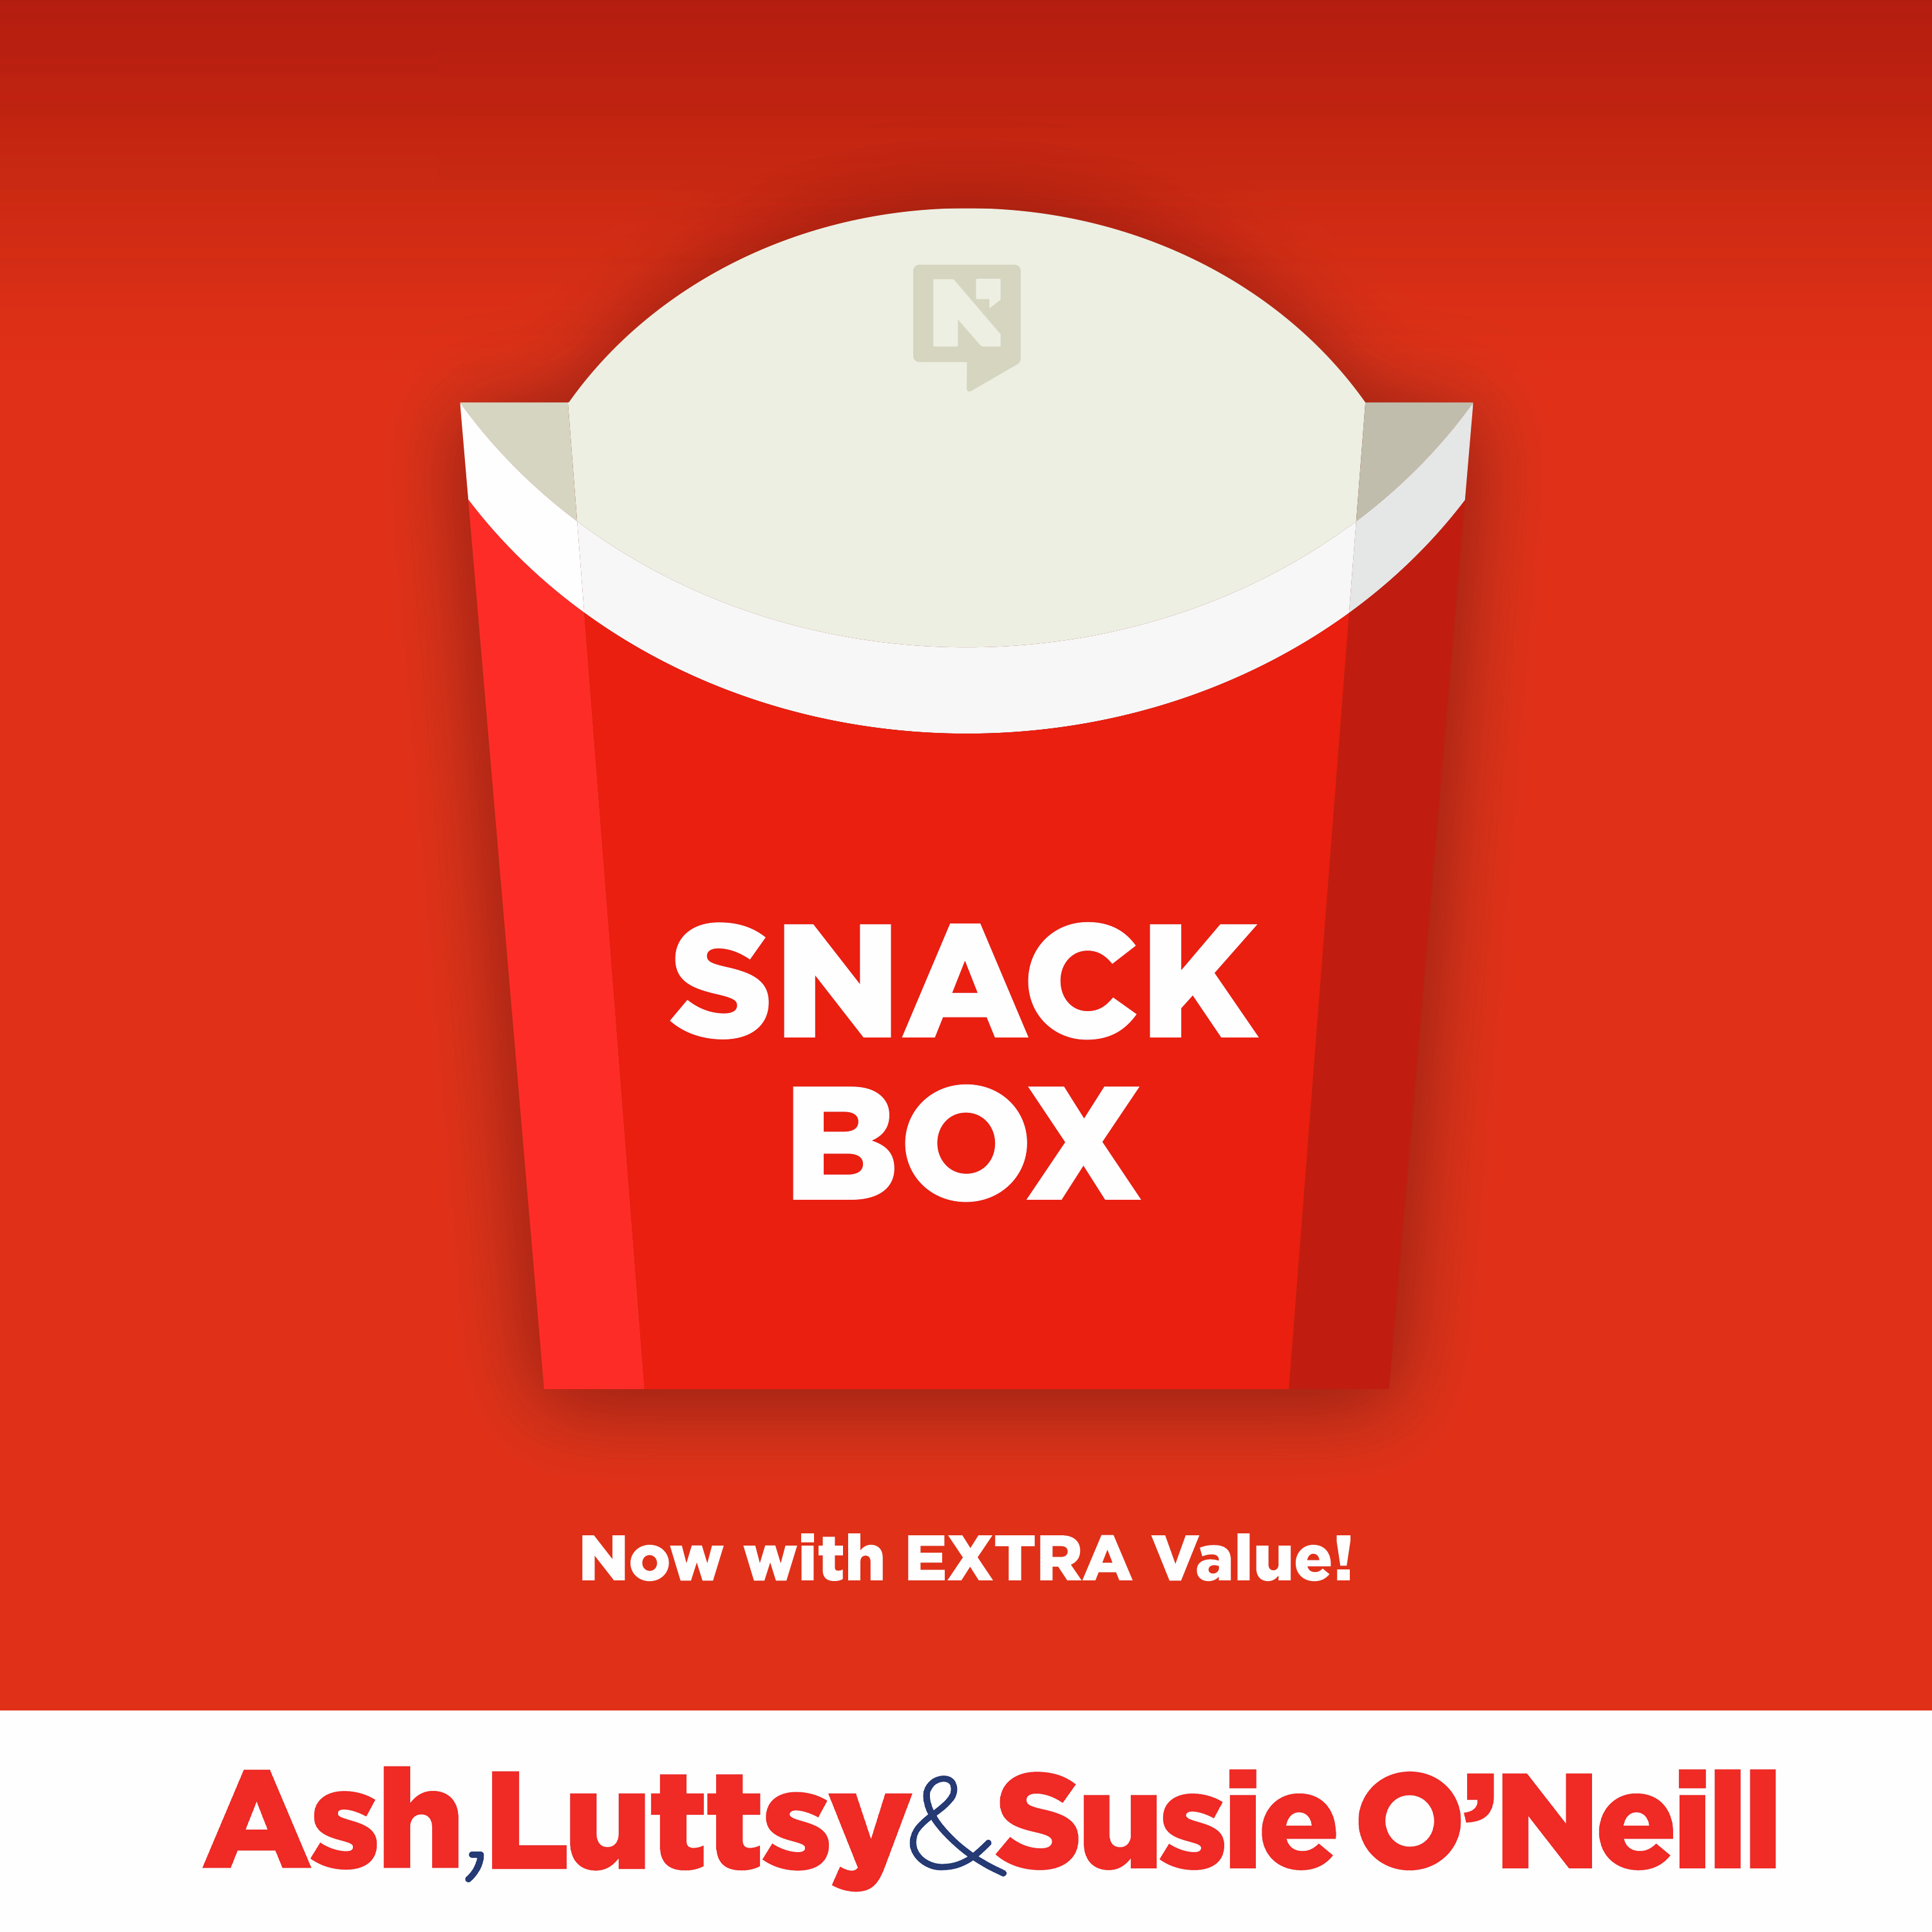 The Ash, Luttsy and Susie Snackbox | Thursday 13th June